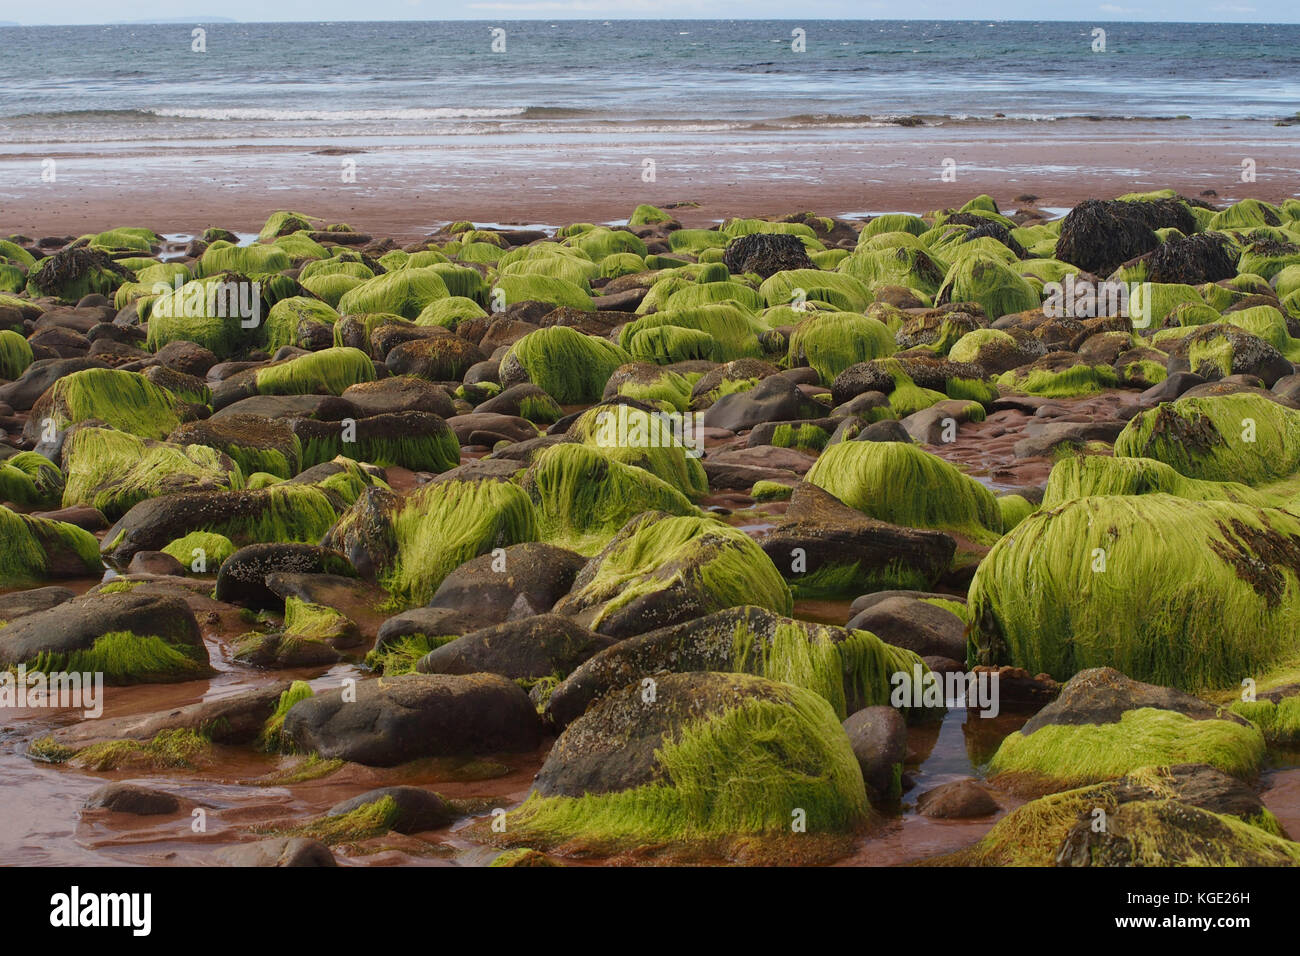 Rocks covered with seaweed on a Scottish beach at Opinan Stock Photo